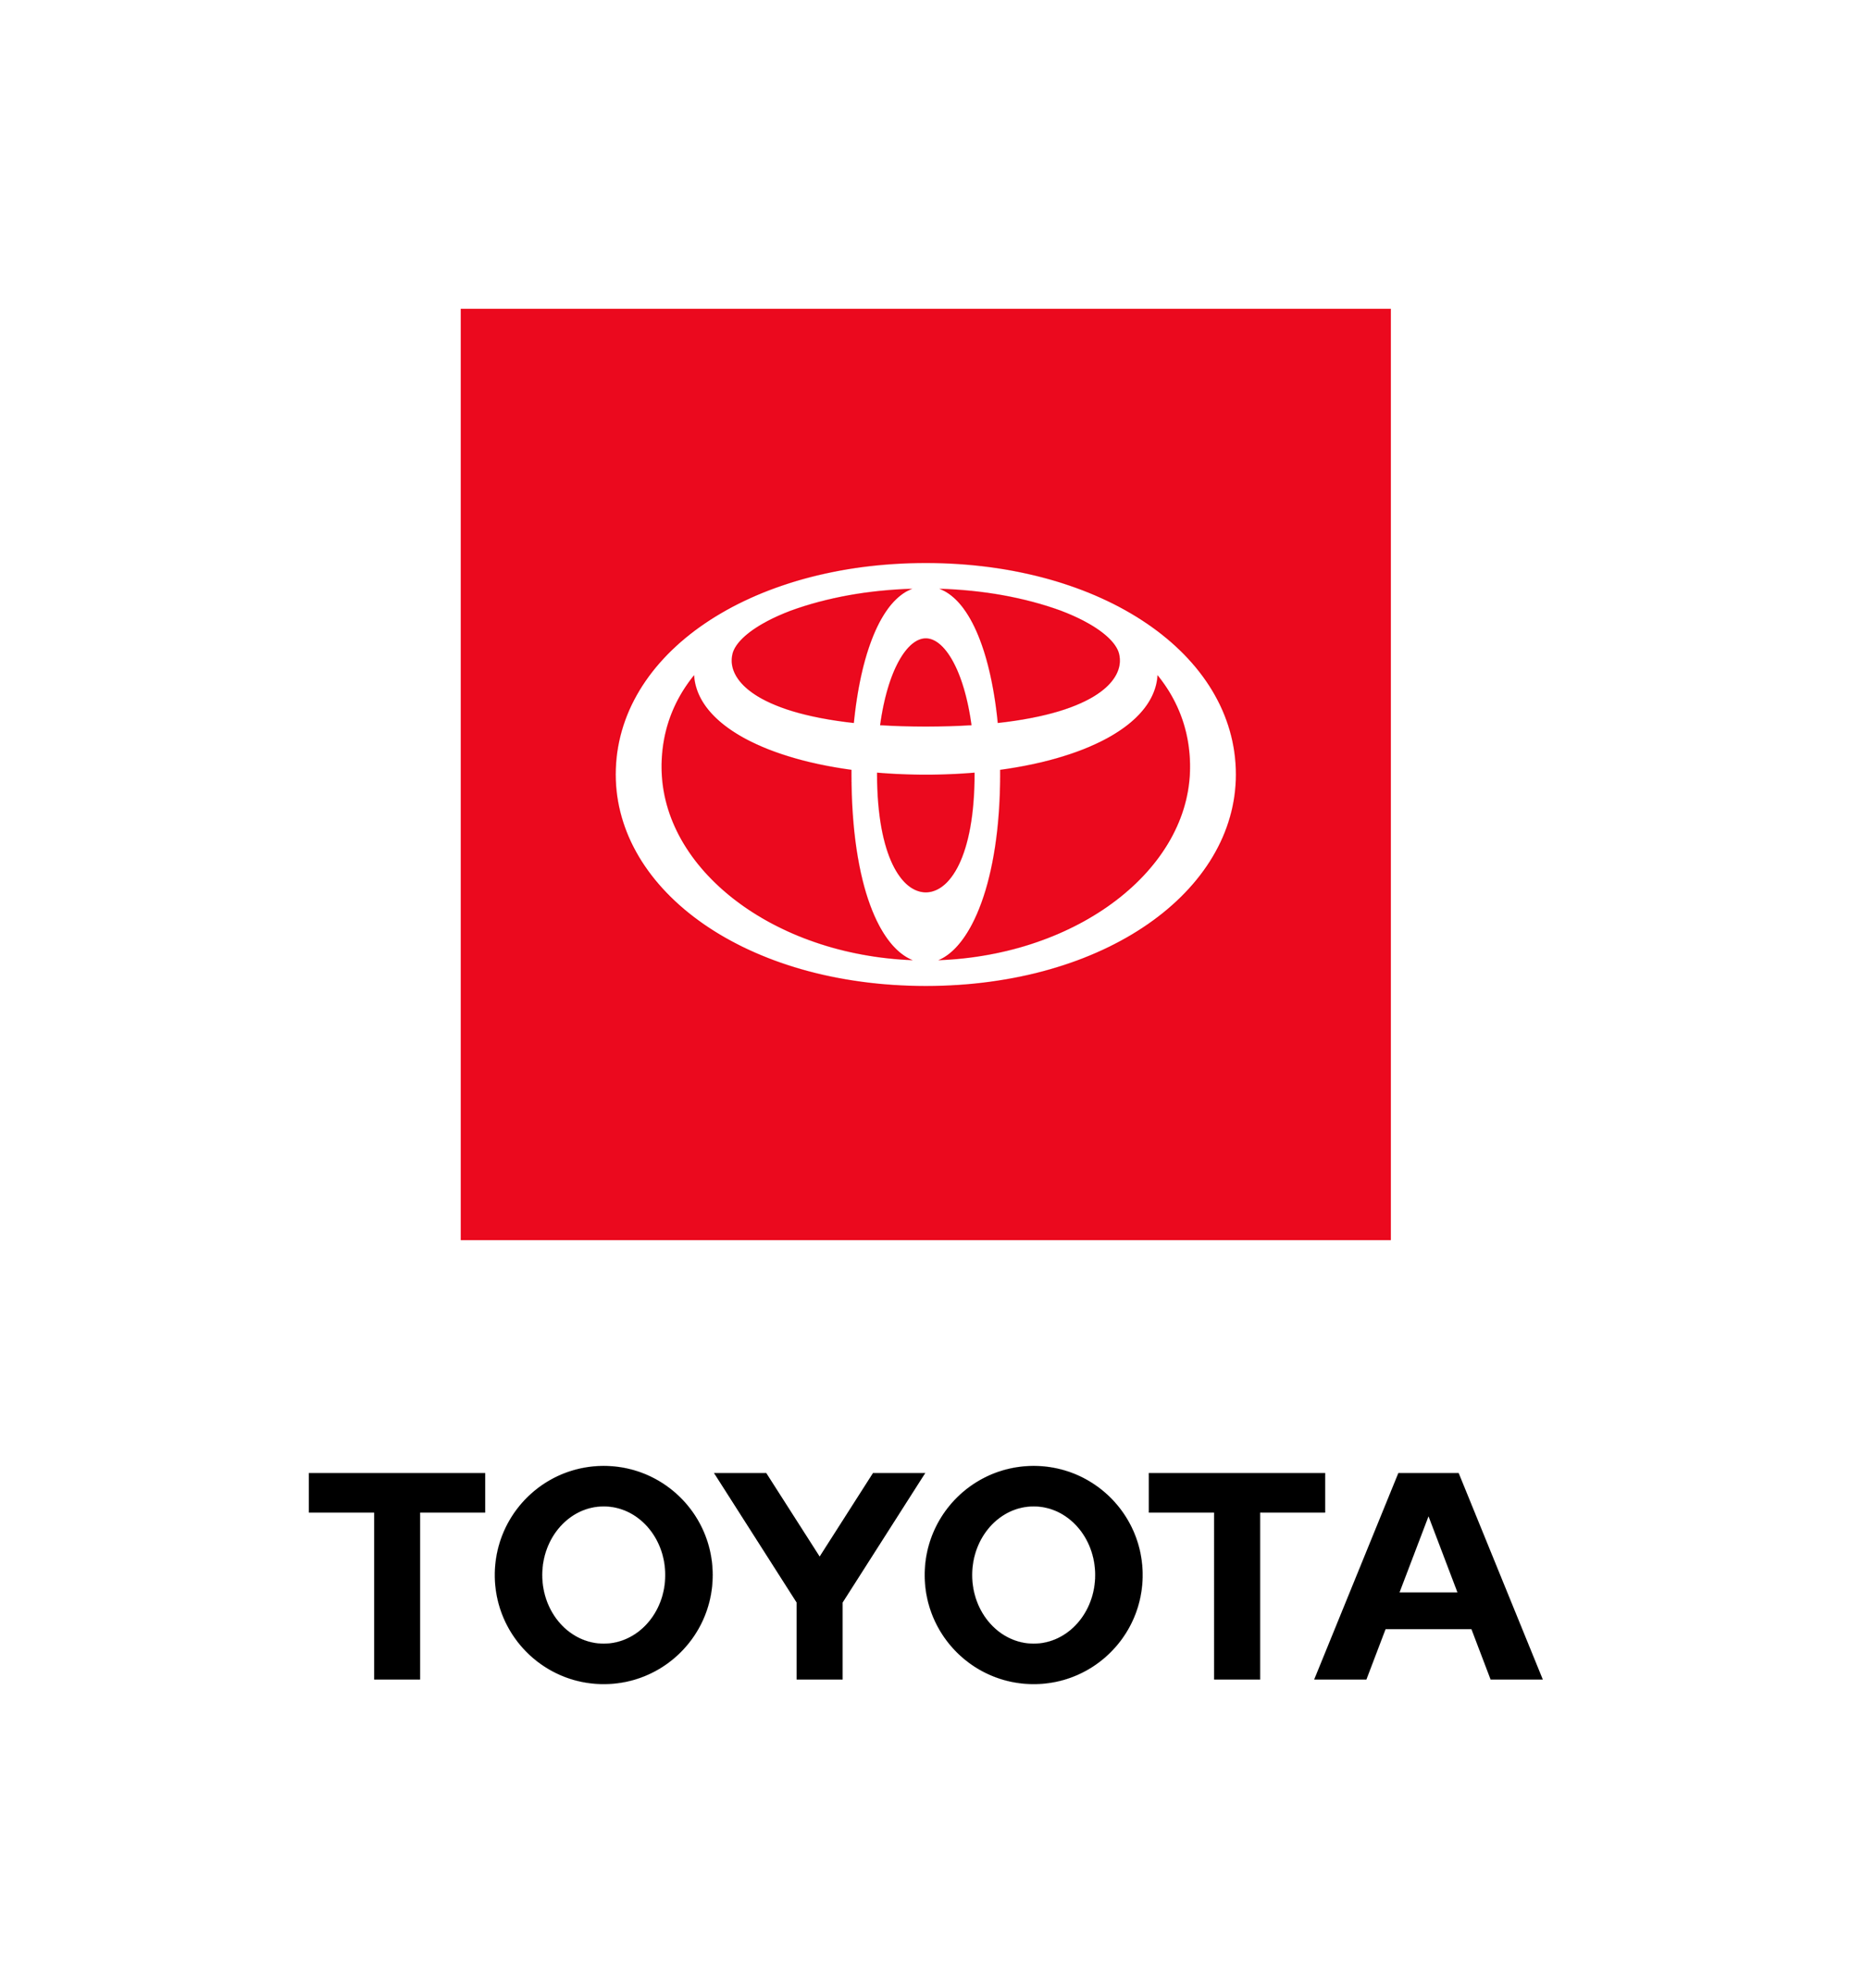 Brand New: New Logo and Identity for Toyota